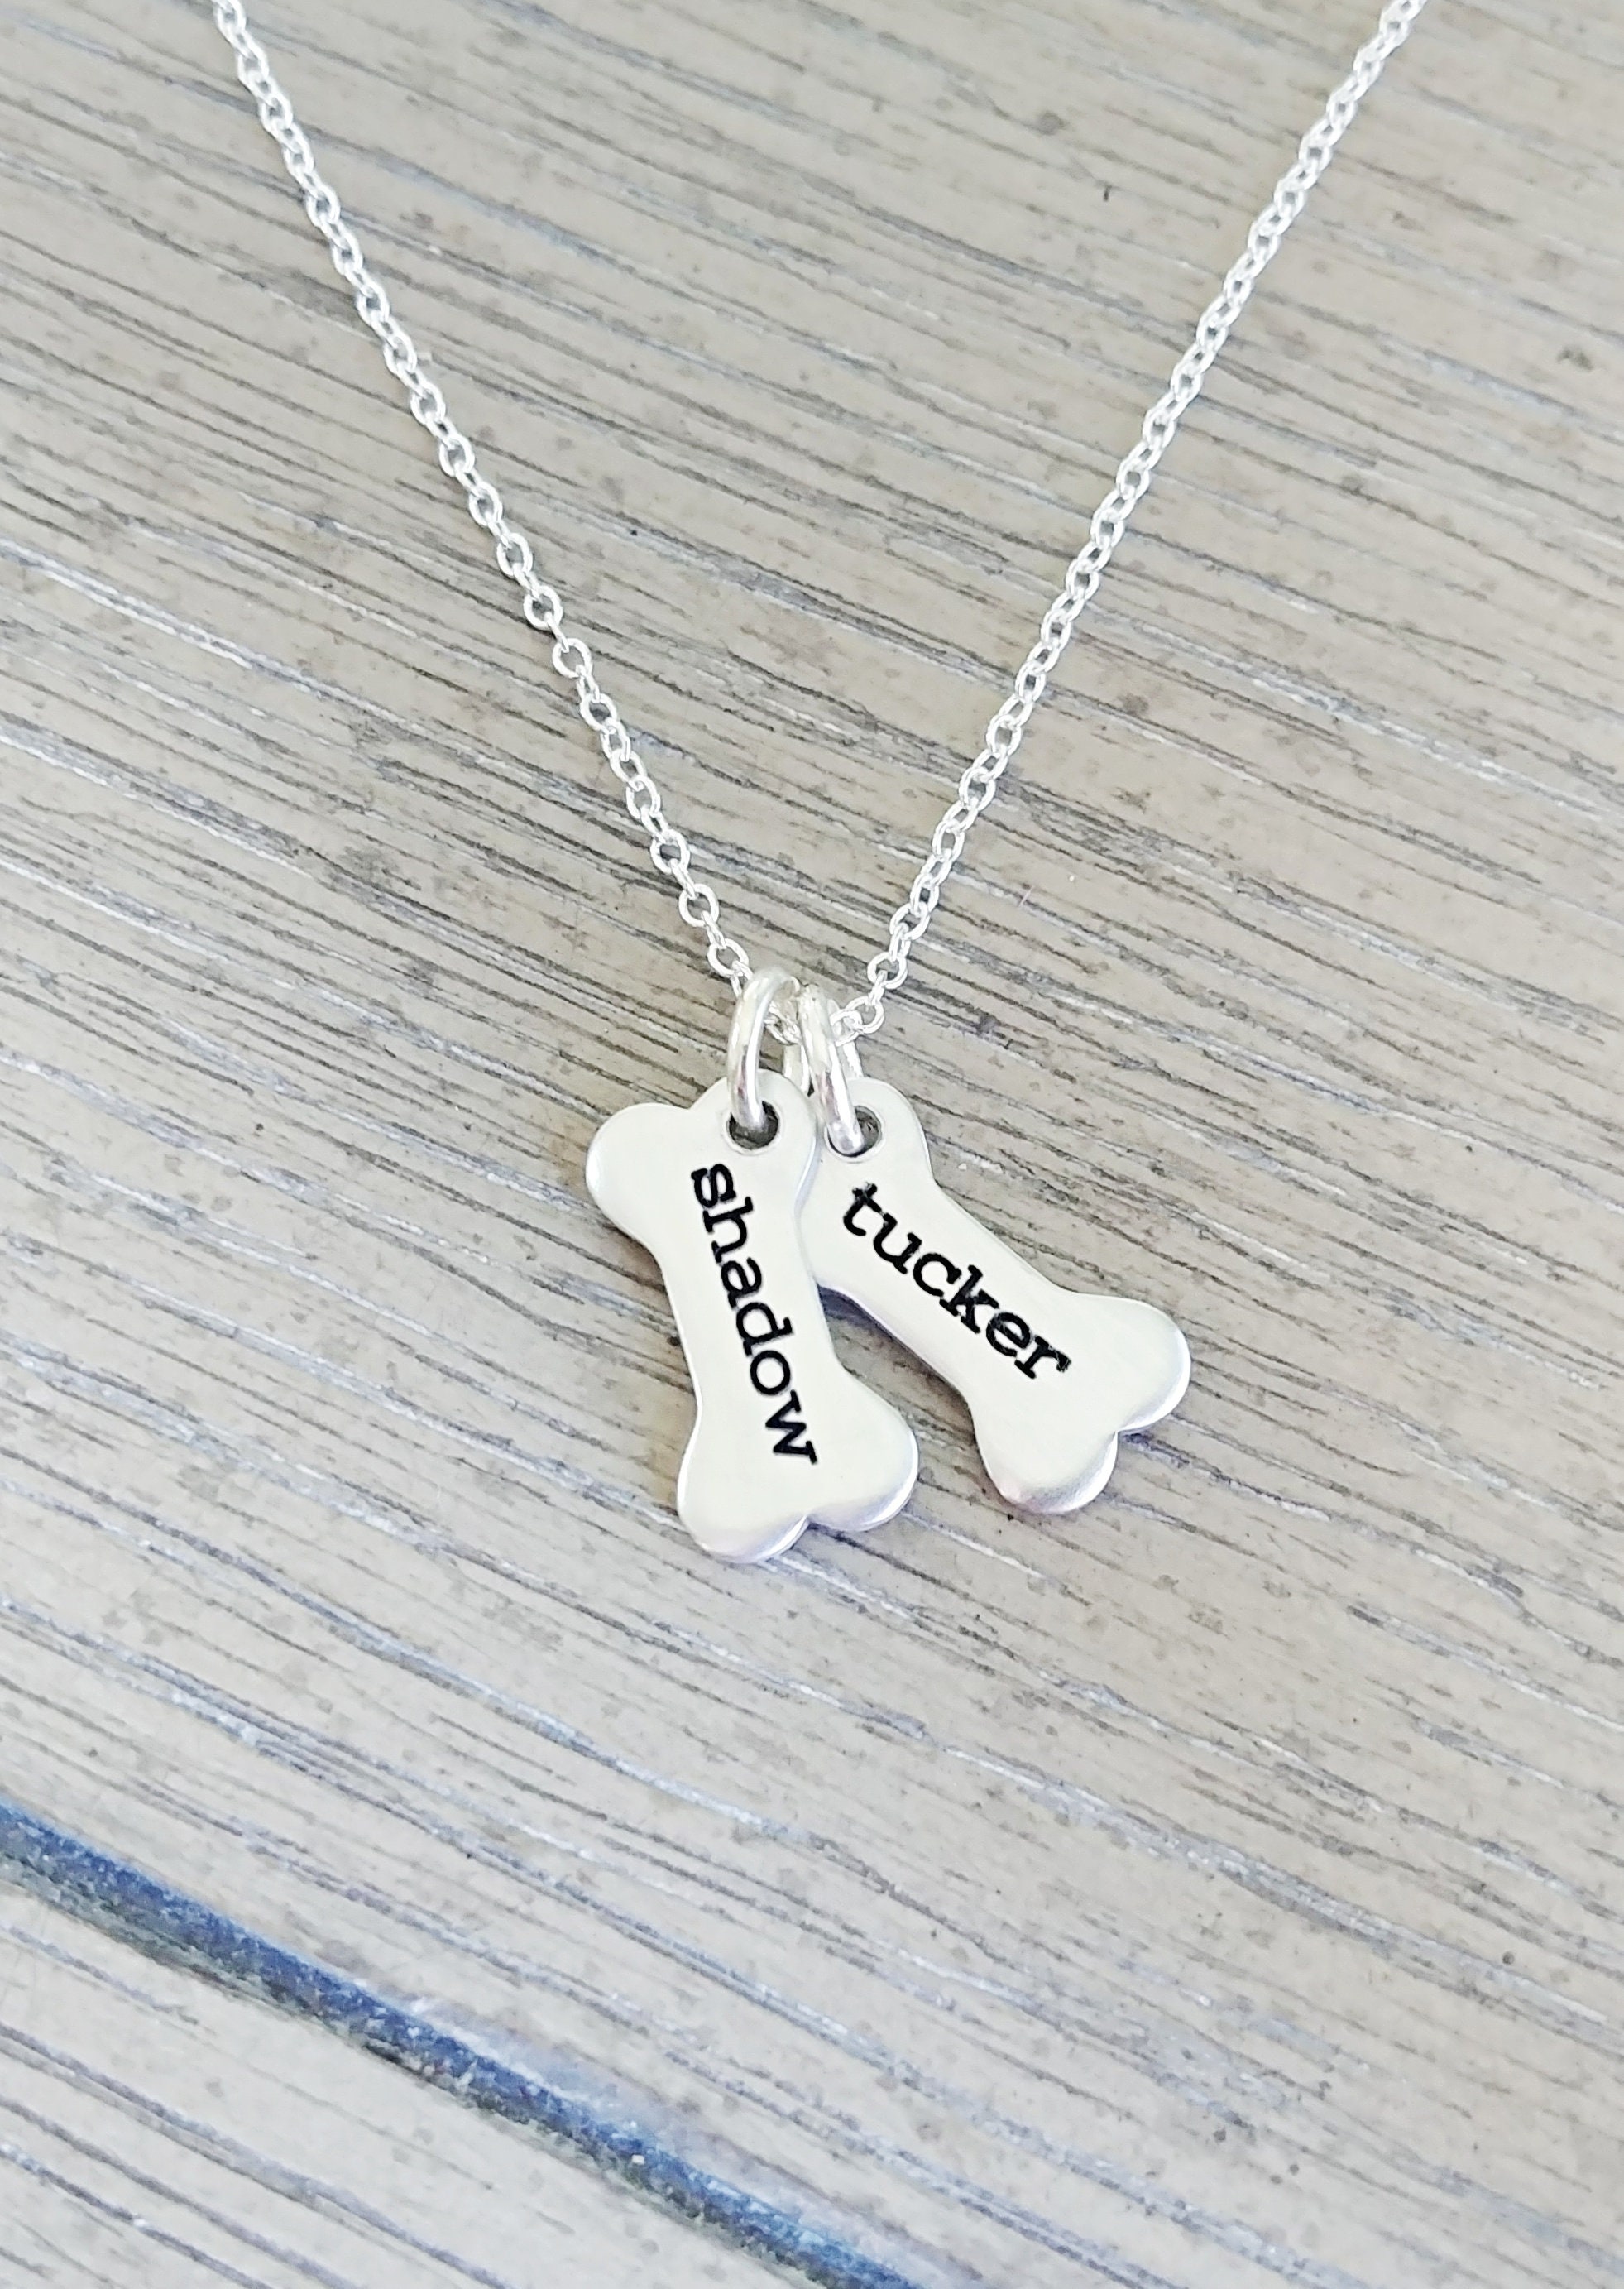 Sublimation Doodlebone Collar With Blank Name Pendant For Pets From  Lvitsss, $10.66